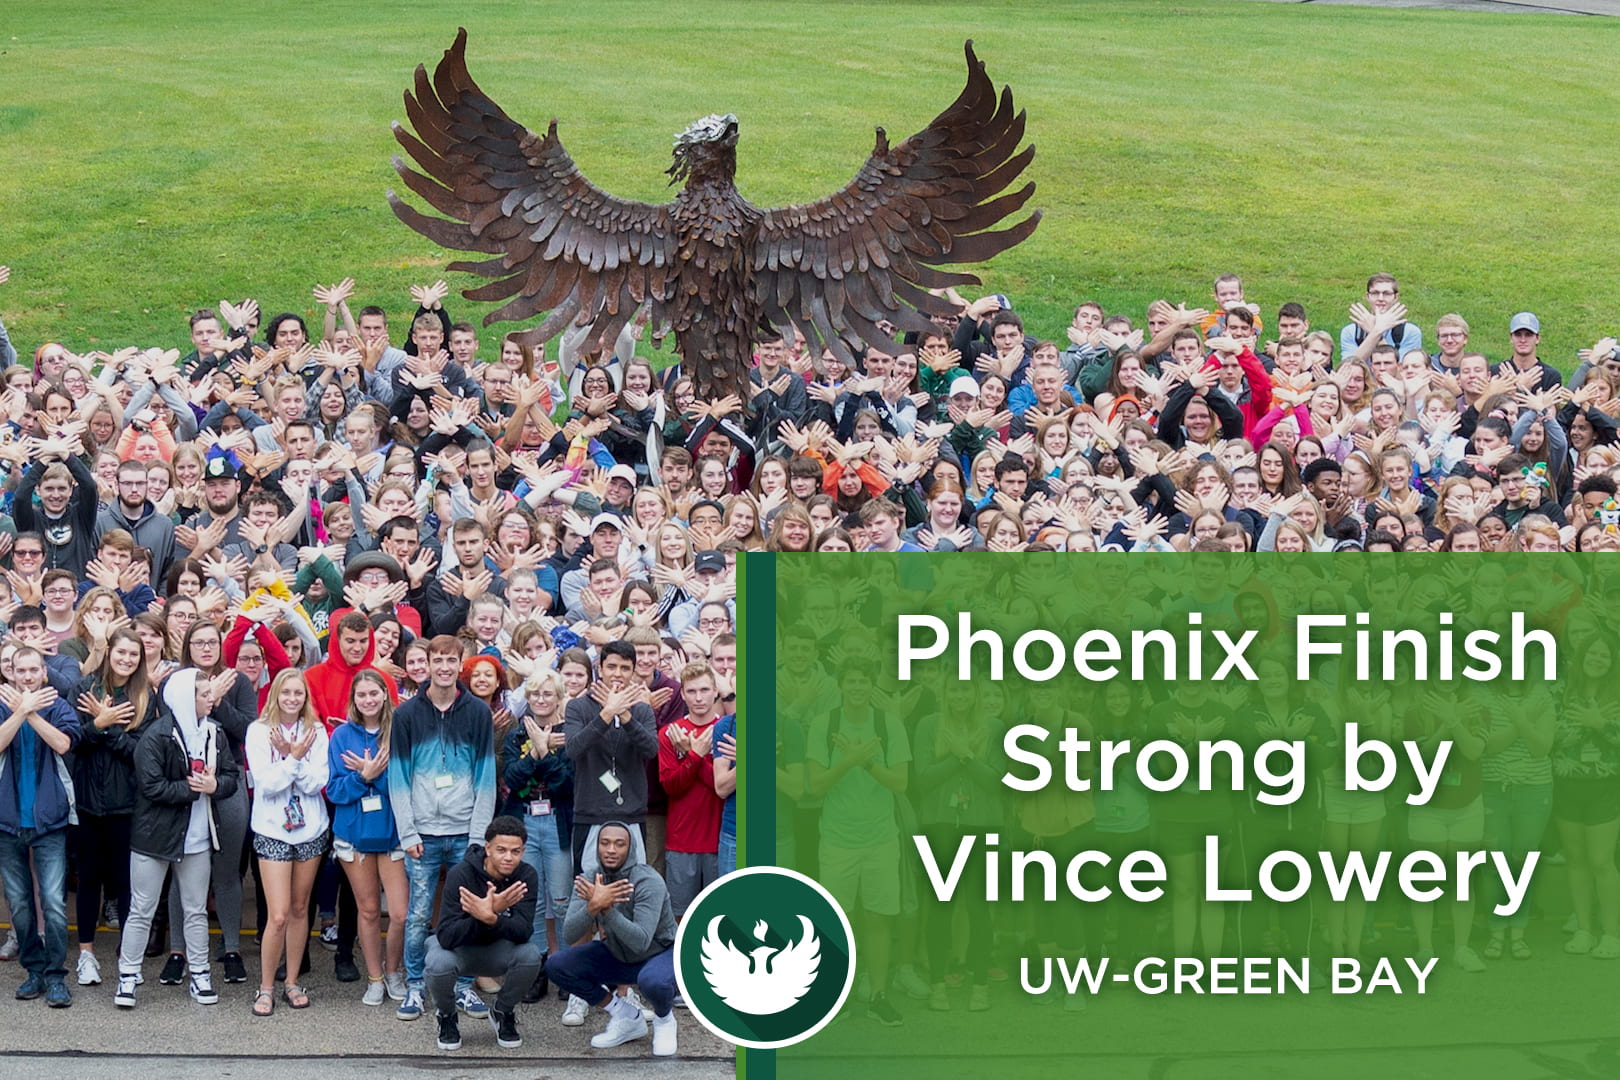 Photo of the UW-Green Bay Phoenix sculpture with students standing in front making a hand phoenix by interlocking their hands together with the words, "Phoenix Finish Strong by Vince Lowery."